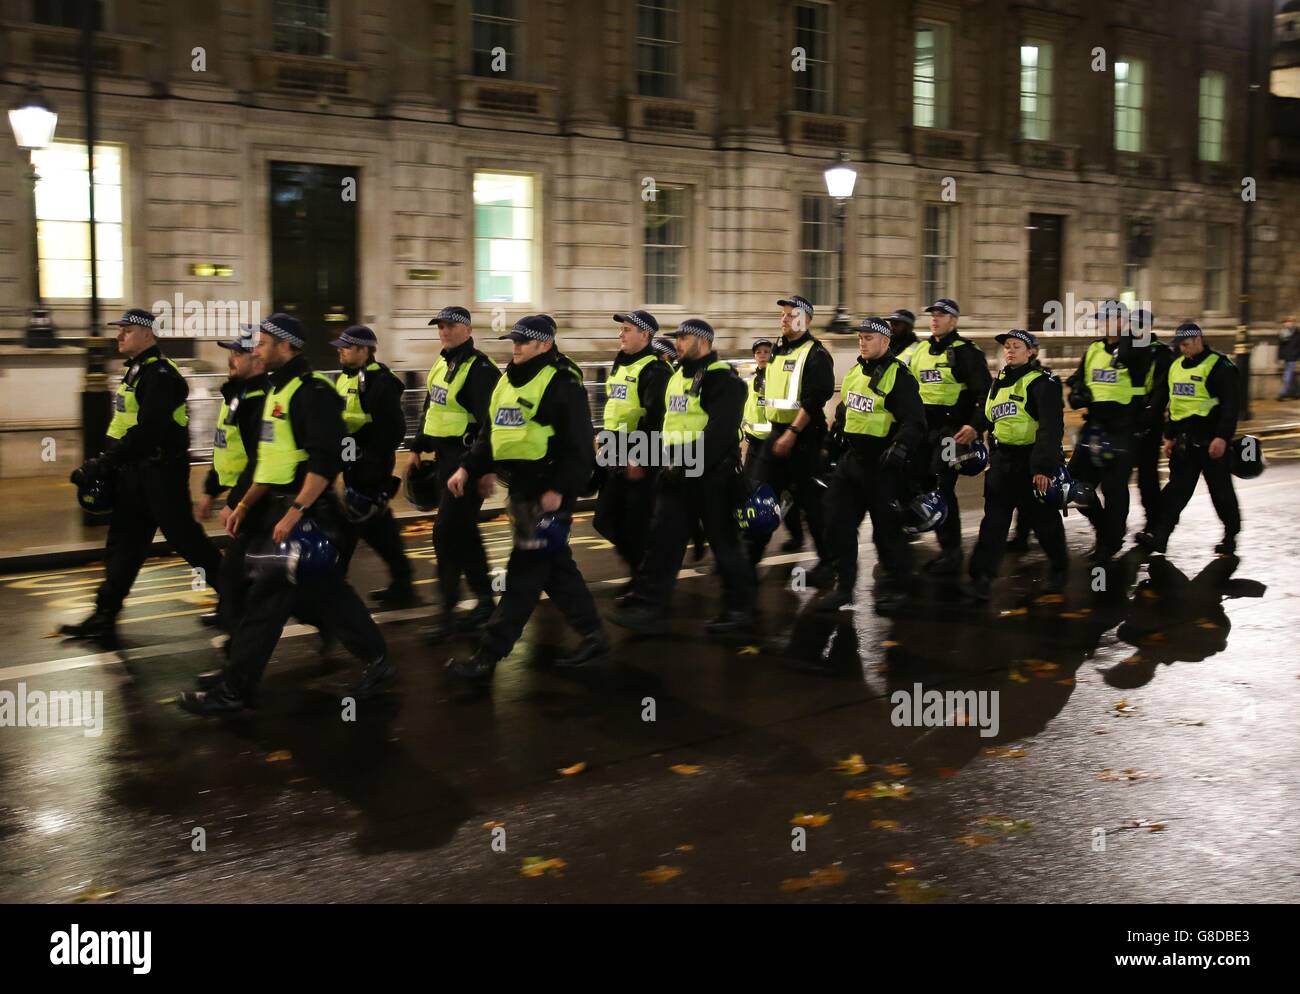 Police officers follow a group of demonstrators at White Hall in London, during the Million Mask March bonfire night protest organised by activist group Anonymous. Stock Photo